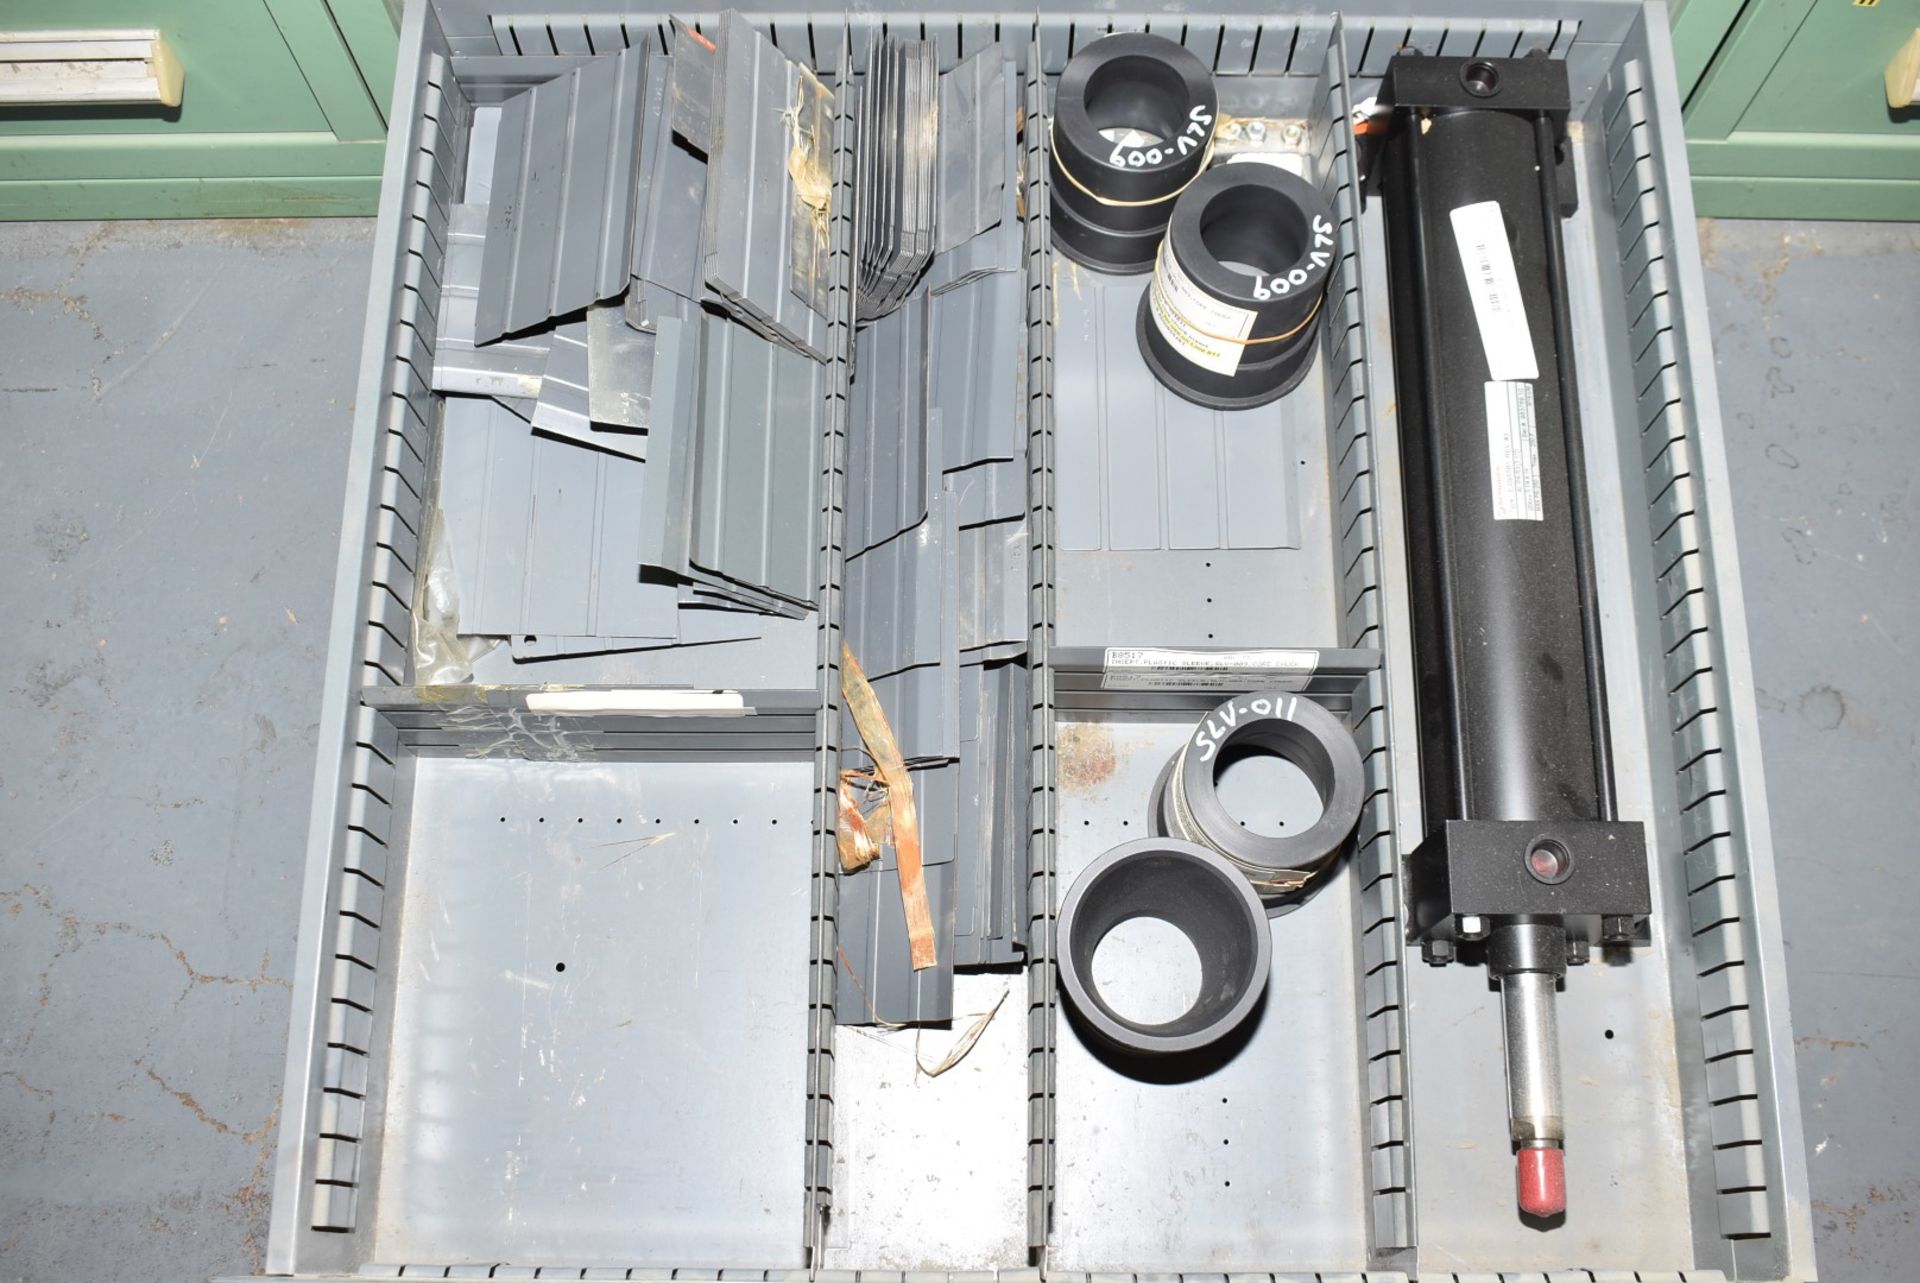 LOT/ CONTENTS OF CABINET - INCLUDING AUTOMATION COMPONENTS, AIR CYLINDERS, OIL SEALS, MOUNTS & - Image 9 of 9